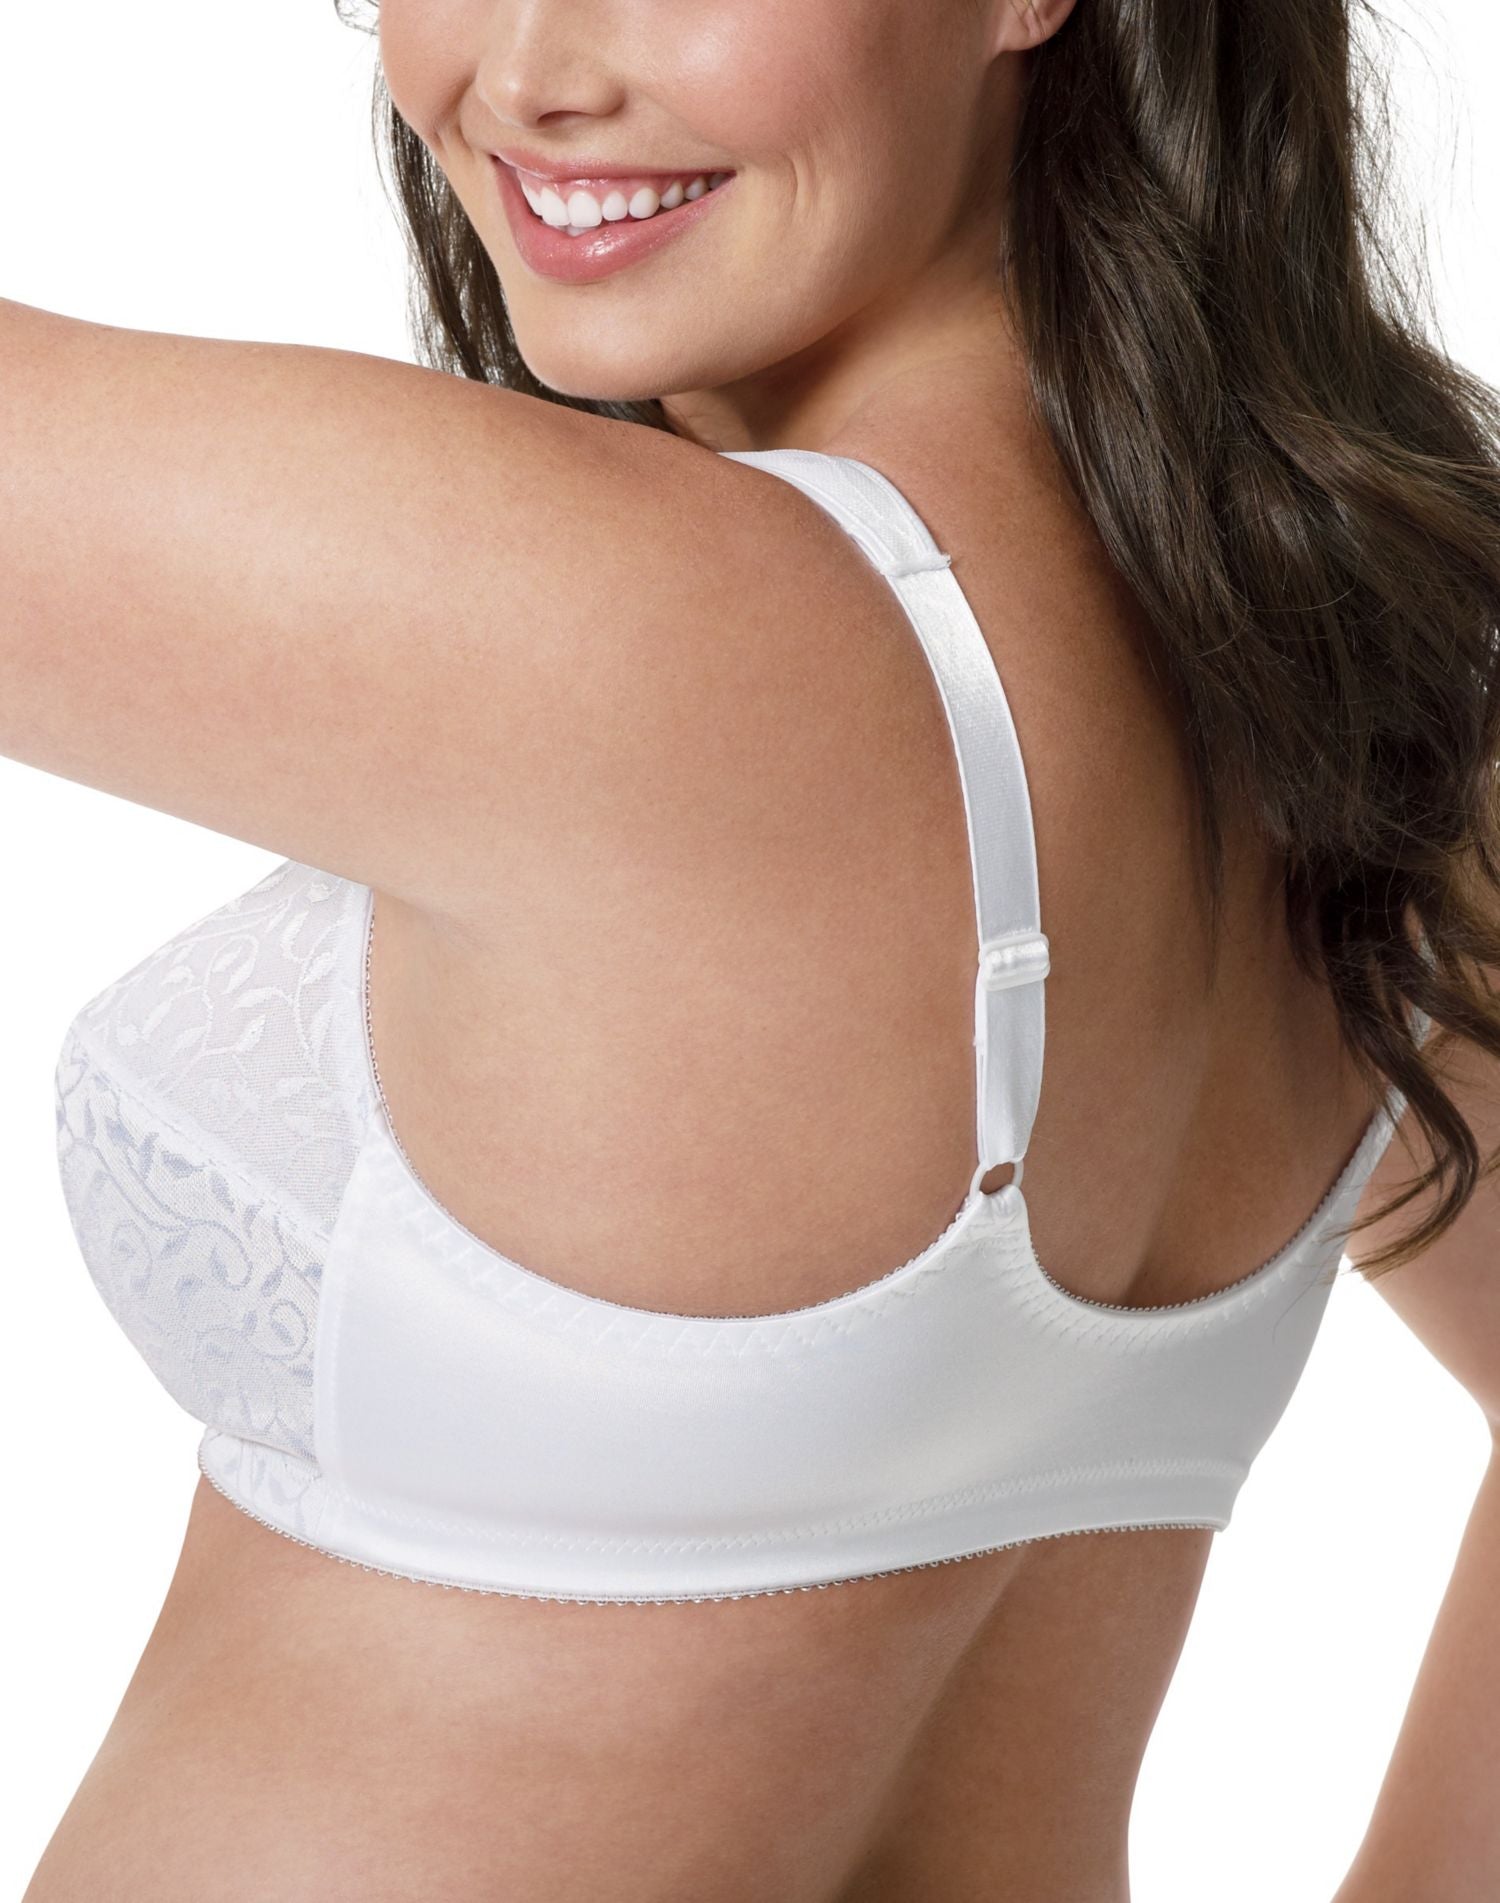 1107 - JMS Comfort Cushion Strap Front Close Wirefree Bra